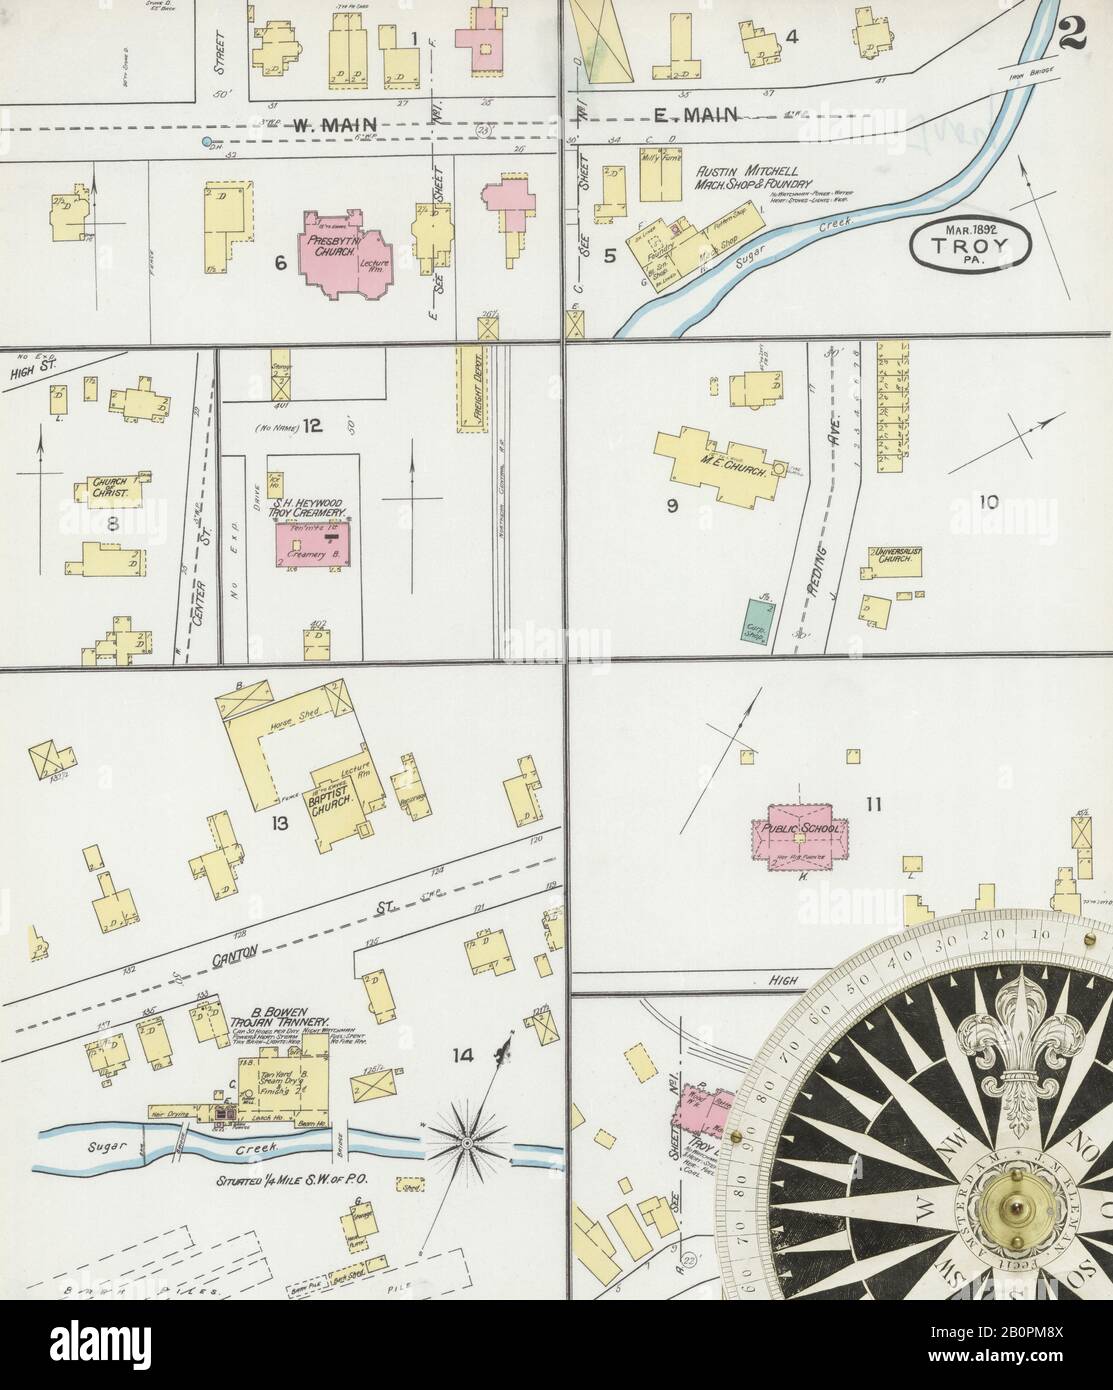 Image 2 of Sanborn Fire Insurance Map from Troy, Bradford County, Pennsylvania. Mar 1892. 2 Sheet(s), America, street map with a Nineteenth Century compass Stock Photo